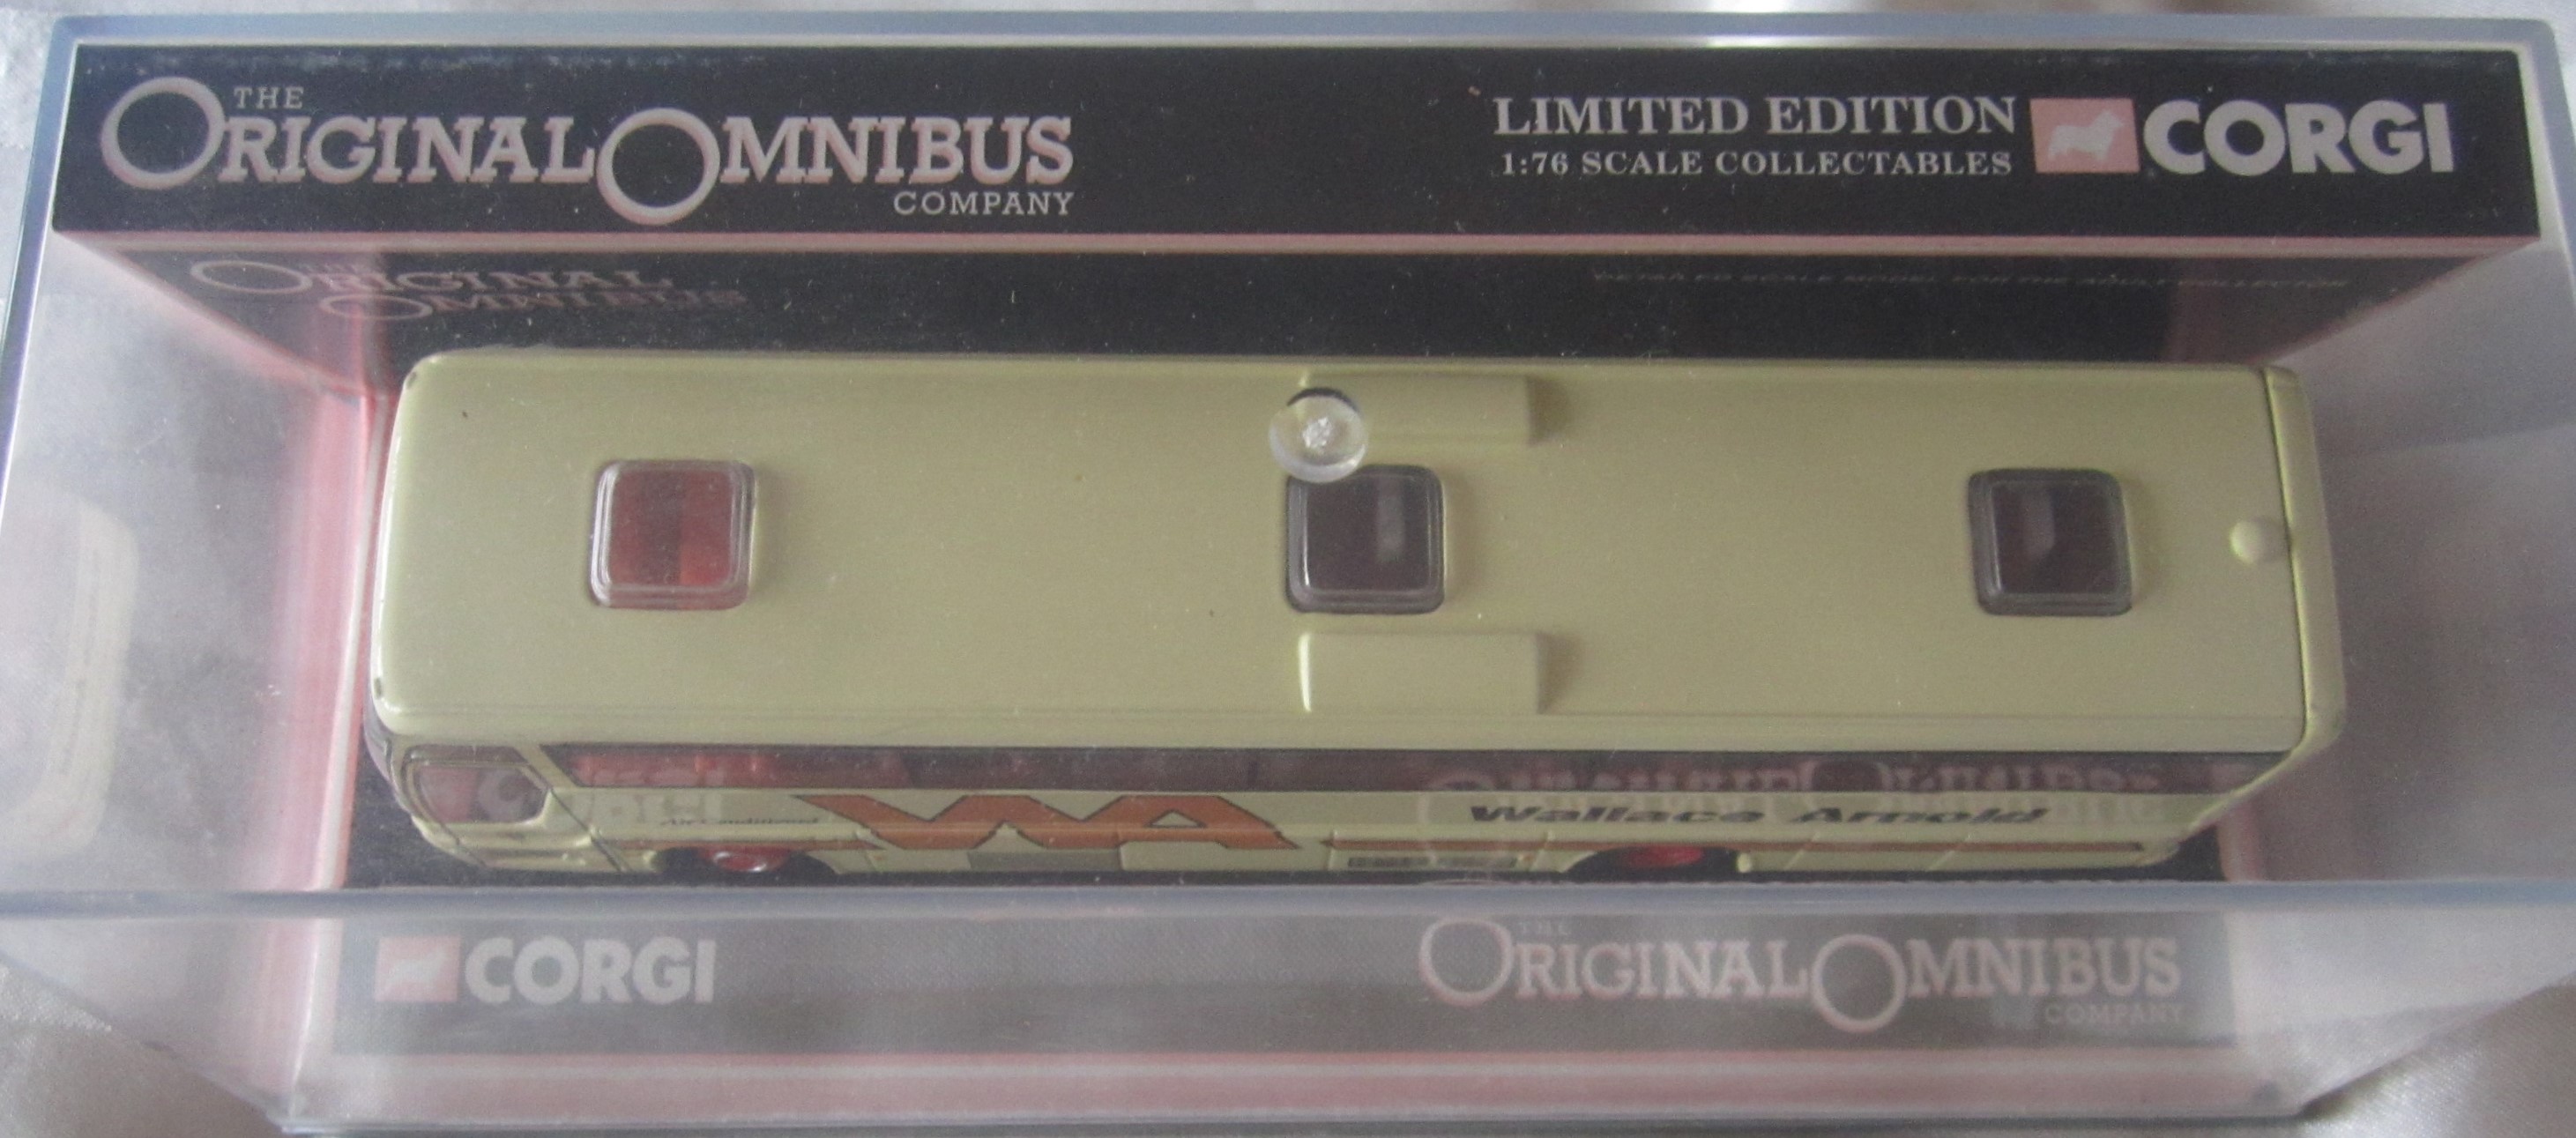 CORGI LIMITED EDITION COACHES PARRYS & WALLACE ARNOLD + IRLAM LORRY - Image 2 of 4